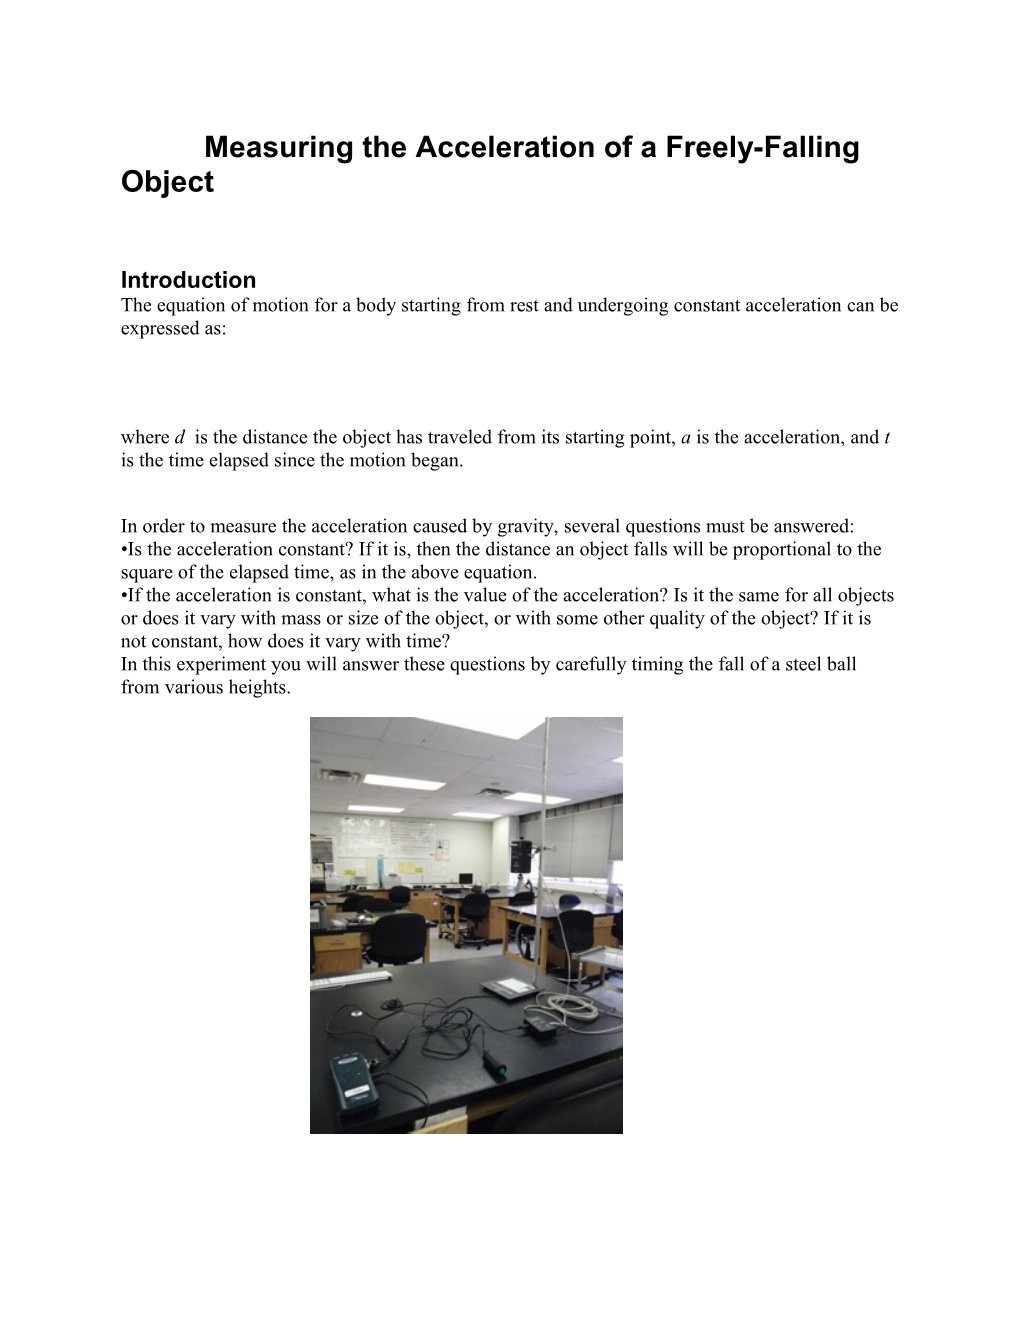 Measuring the Acceleration of a Freely-Falling Object